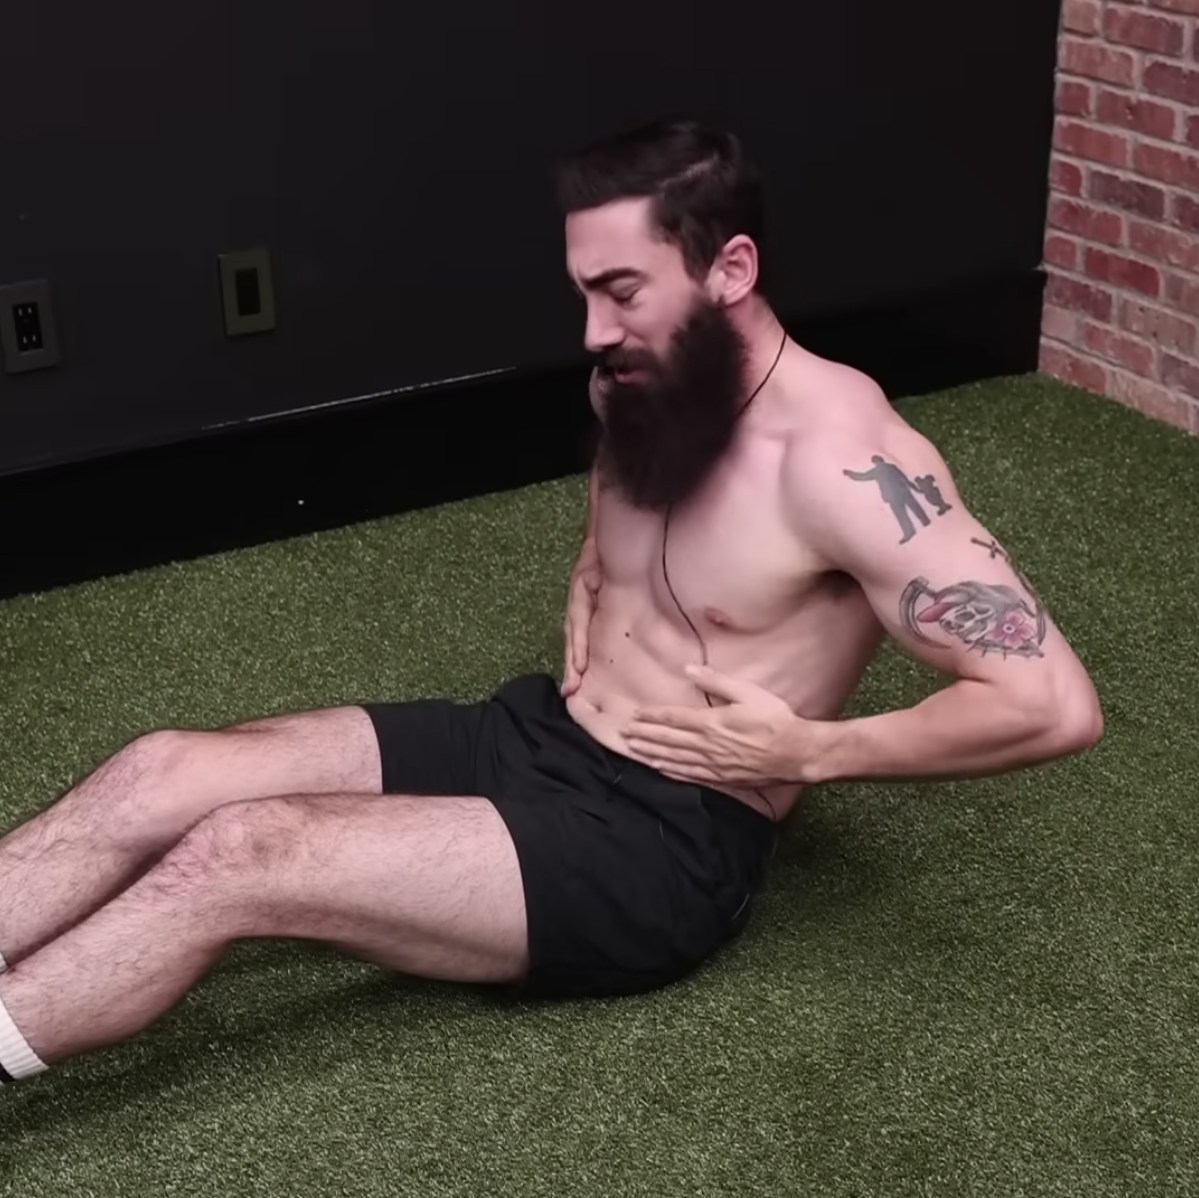 30 Days of the 'Baby Monkey' Workout Shredded This Guy's Abs